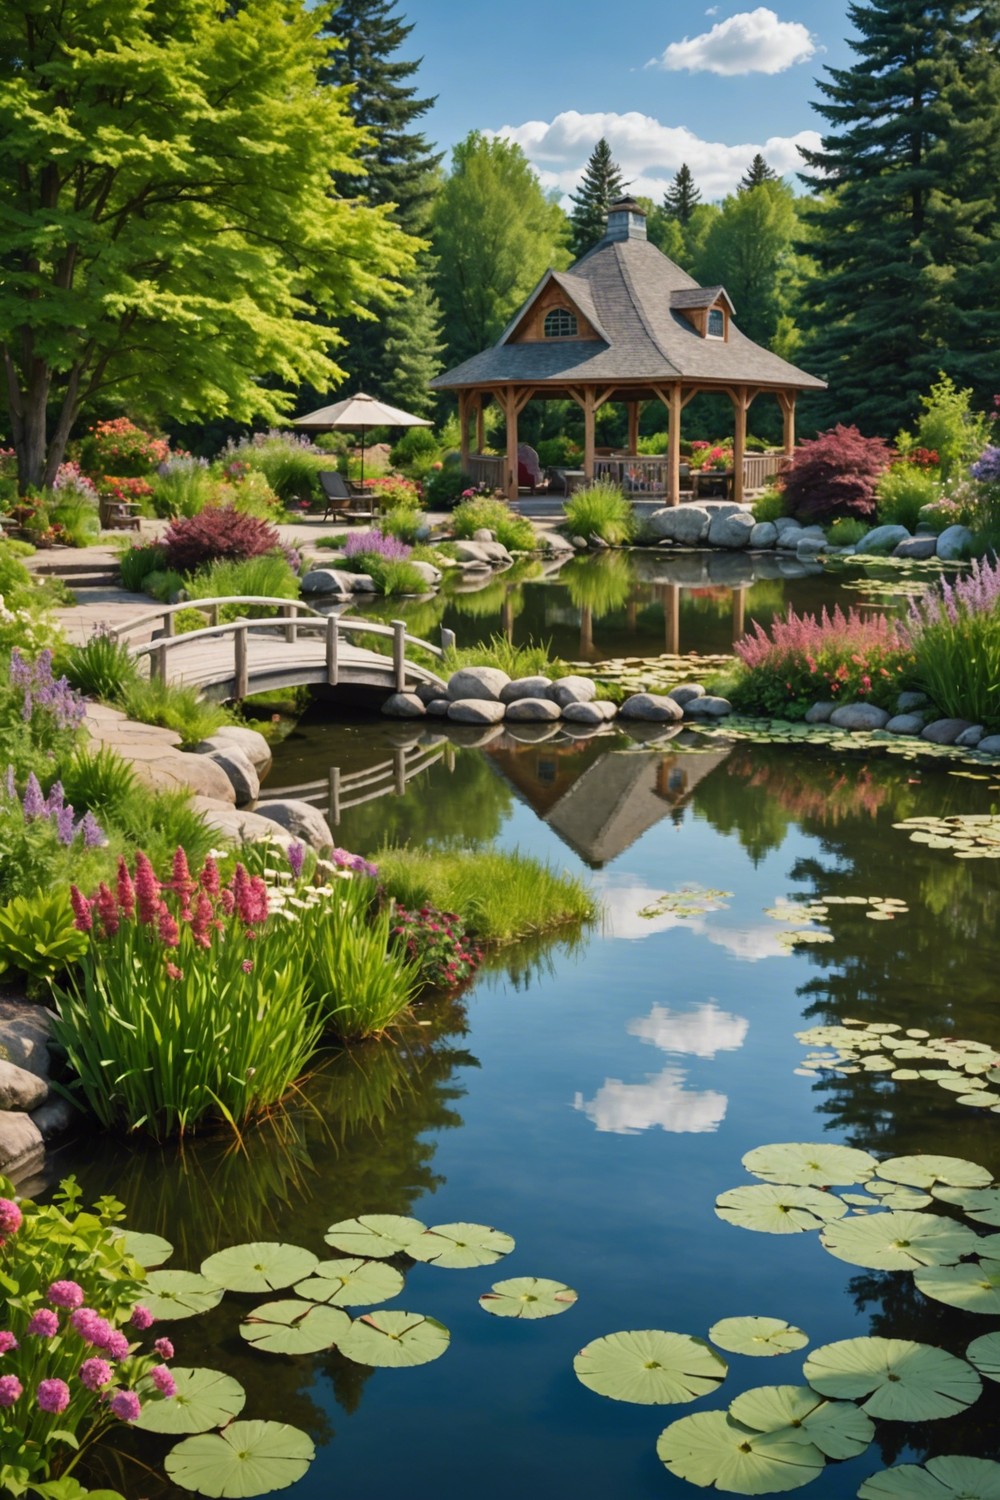 Beautifully Landscaped Pond or Lake Areas